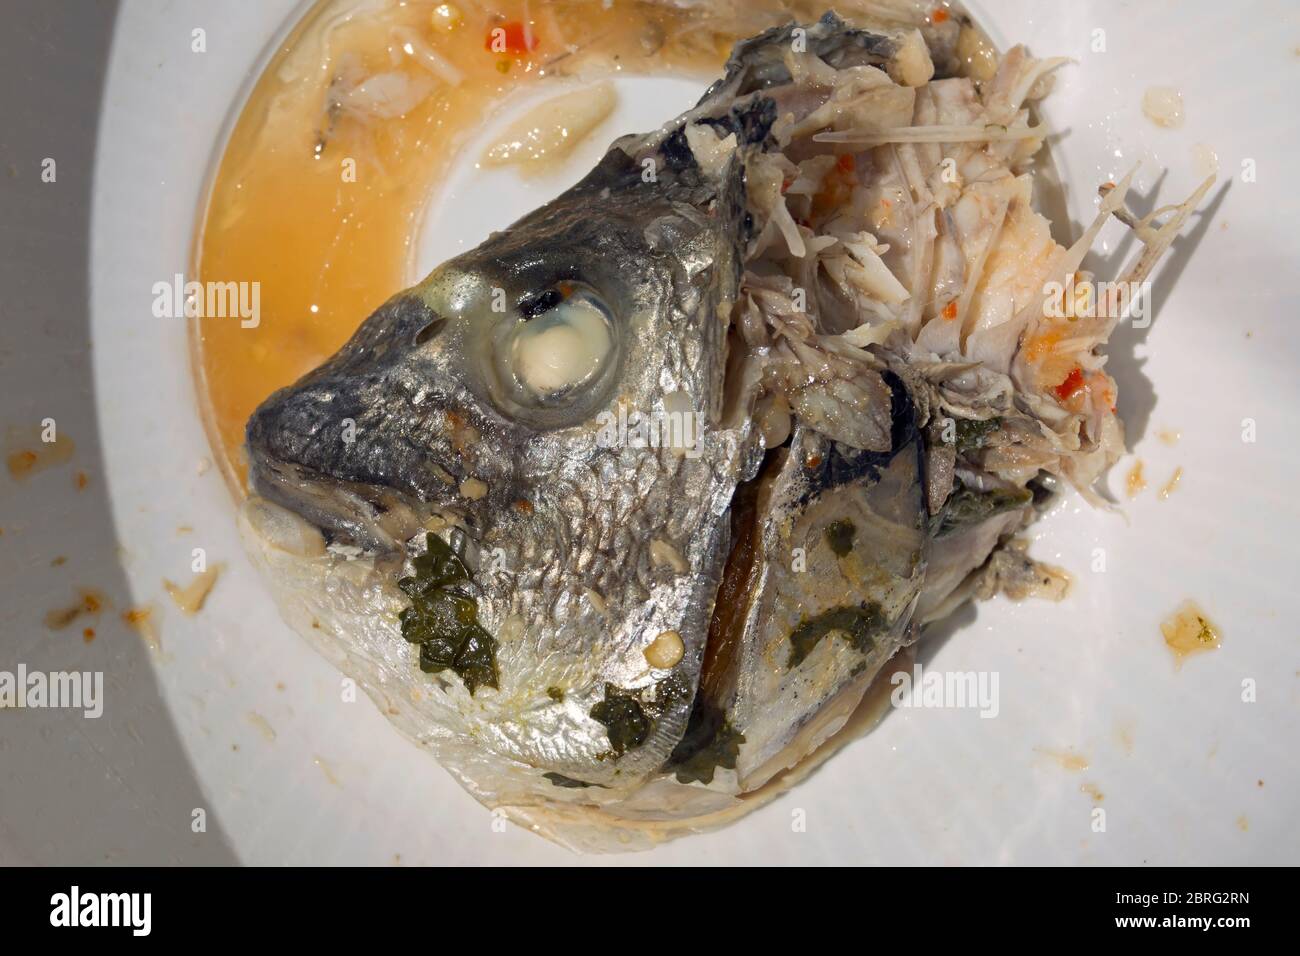 remains after being eaten of a thai-style tom yam fish head soup dish Stock Photo